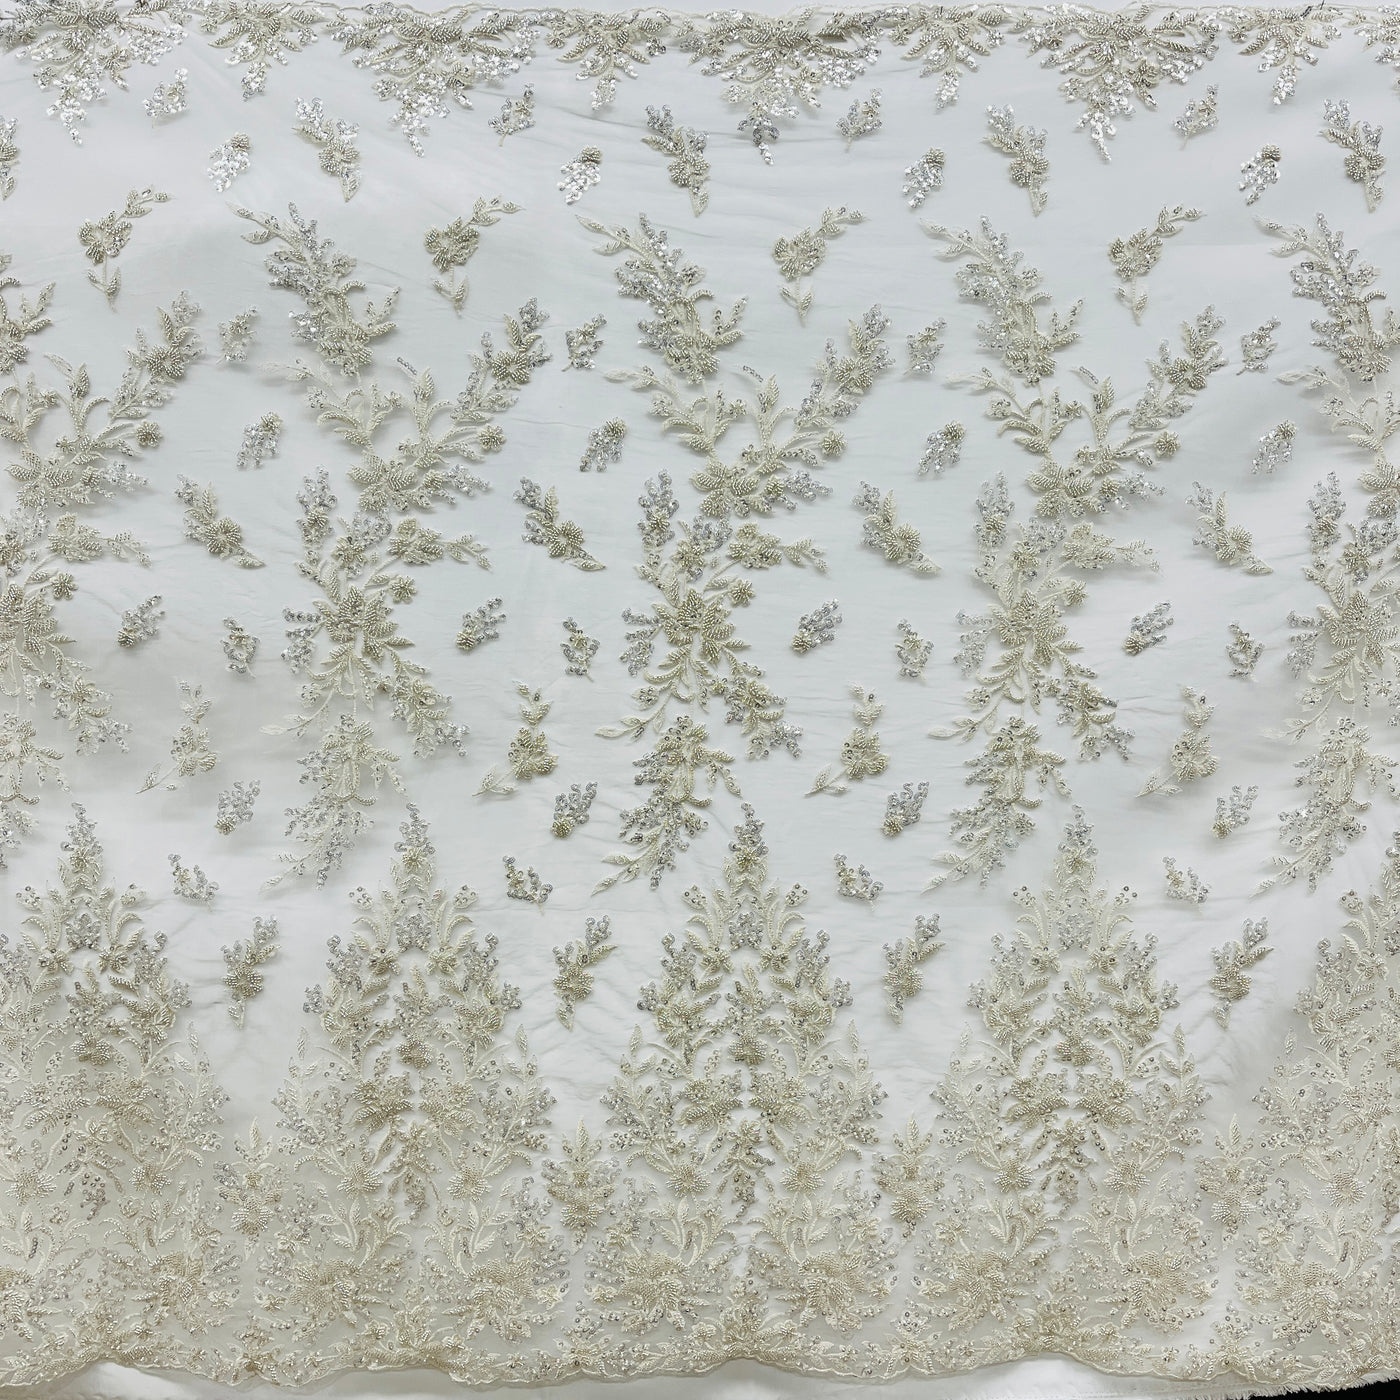 Beaded Lace Fabric Embroidered on 100% Polyester Net Mesh | Lace USA - GD-5926